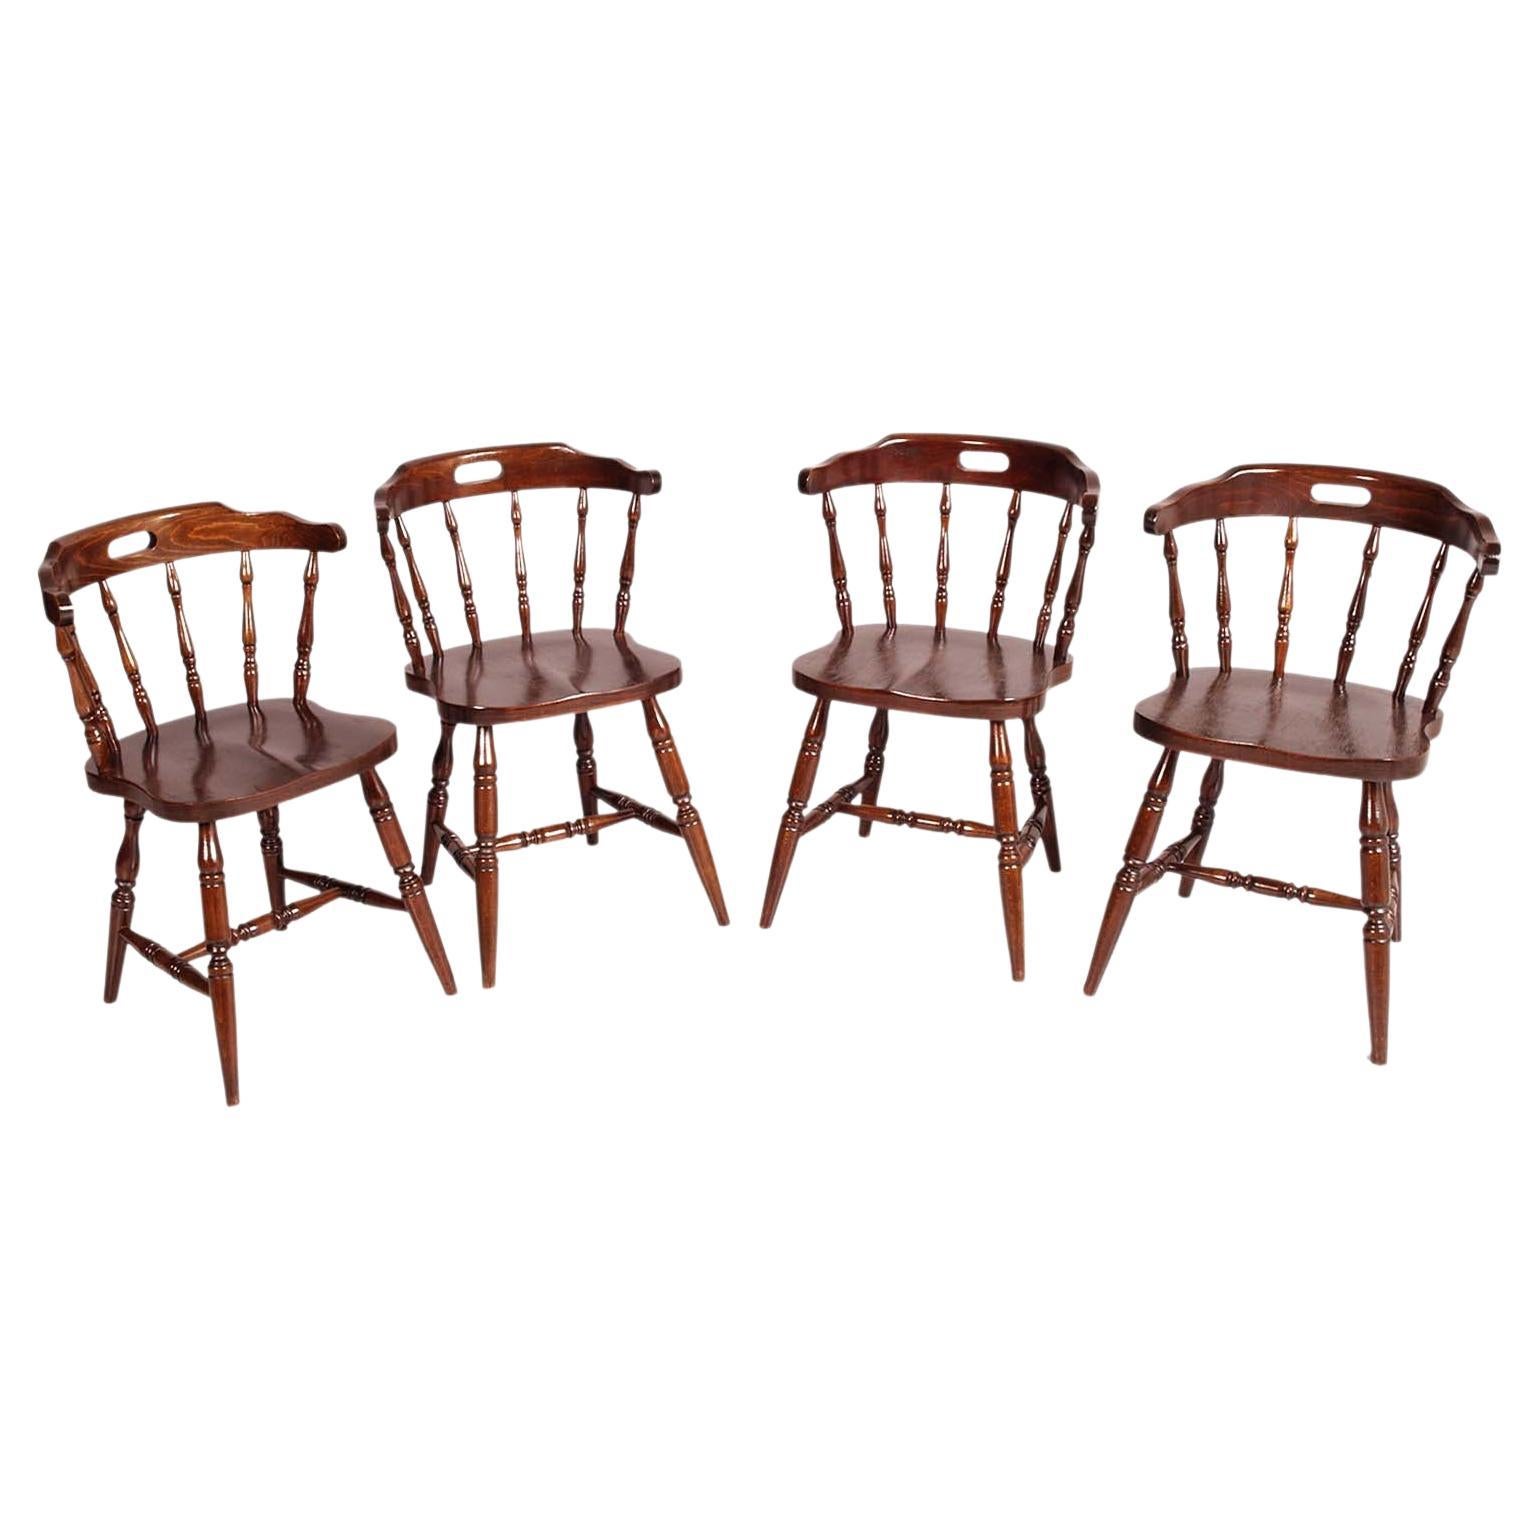 Mid Century Original Tyrolean Robust Armchairs in Chestnut Wood, Wax Polished For Sale